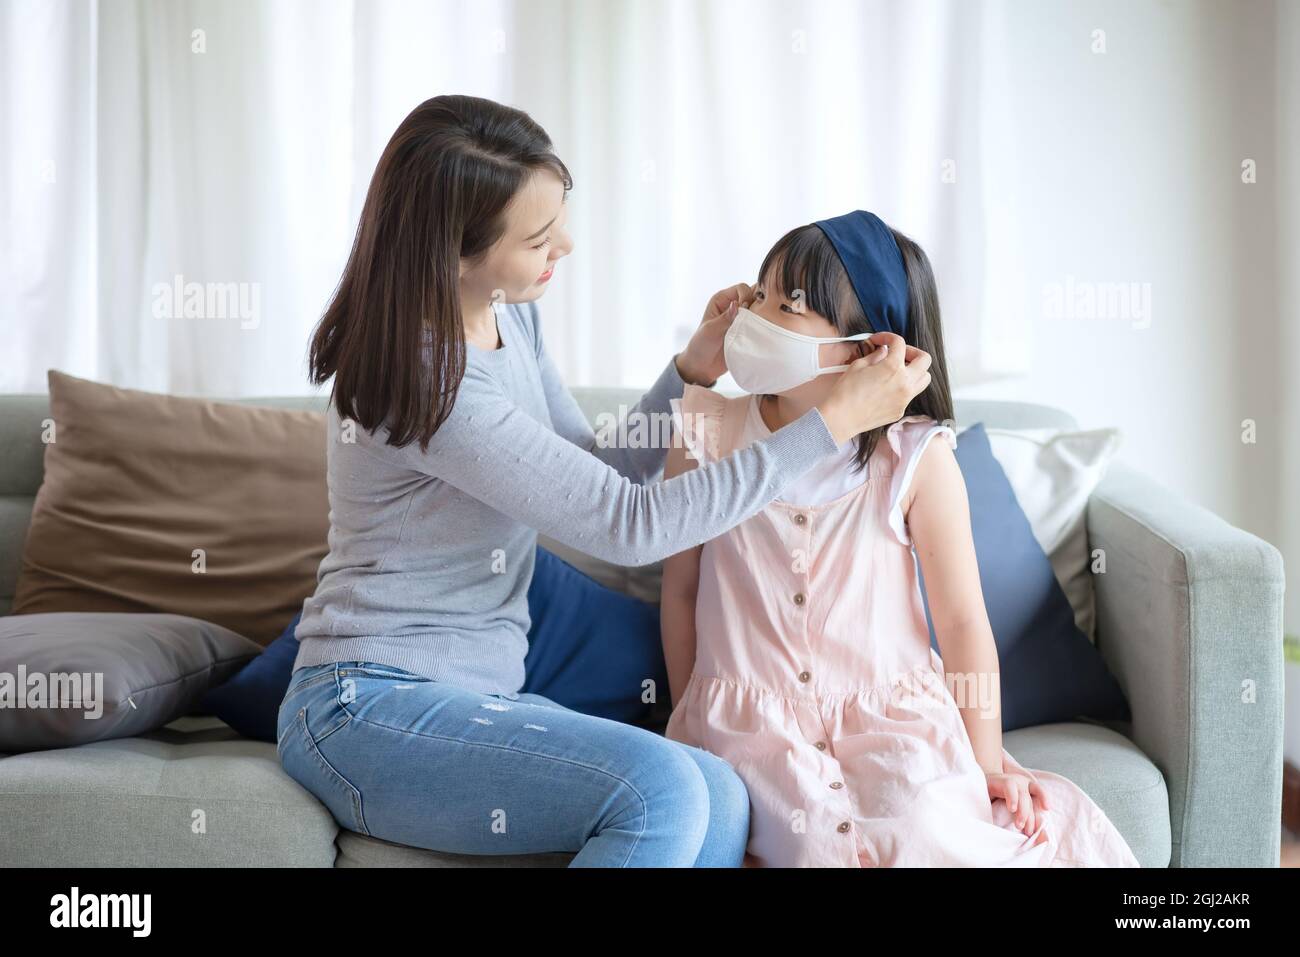 Asian mother teaching her daughter to wear hygienic face mask for prevent coronavirus or Covid-19 Stock Photo